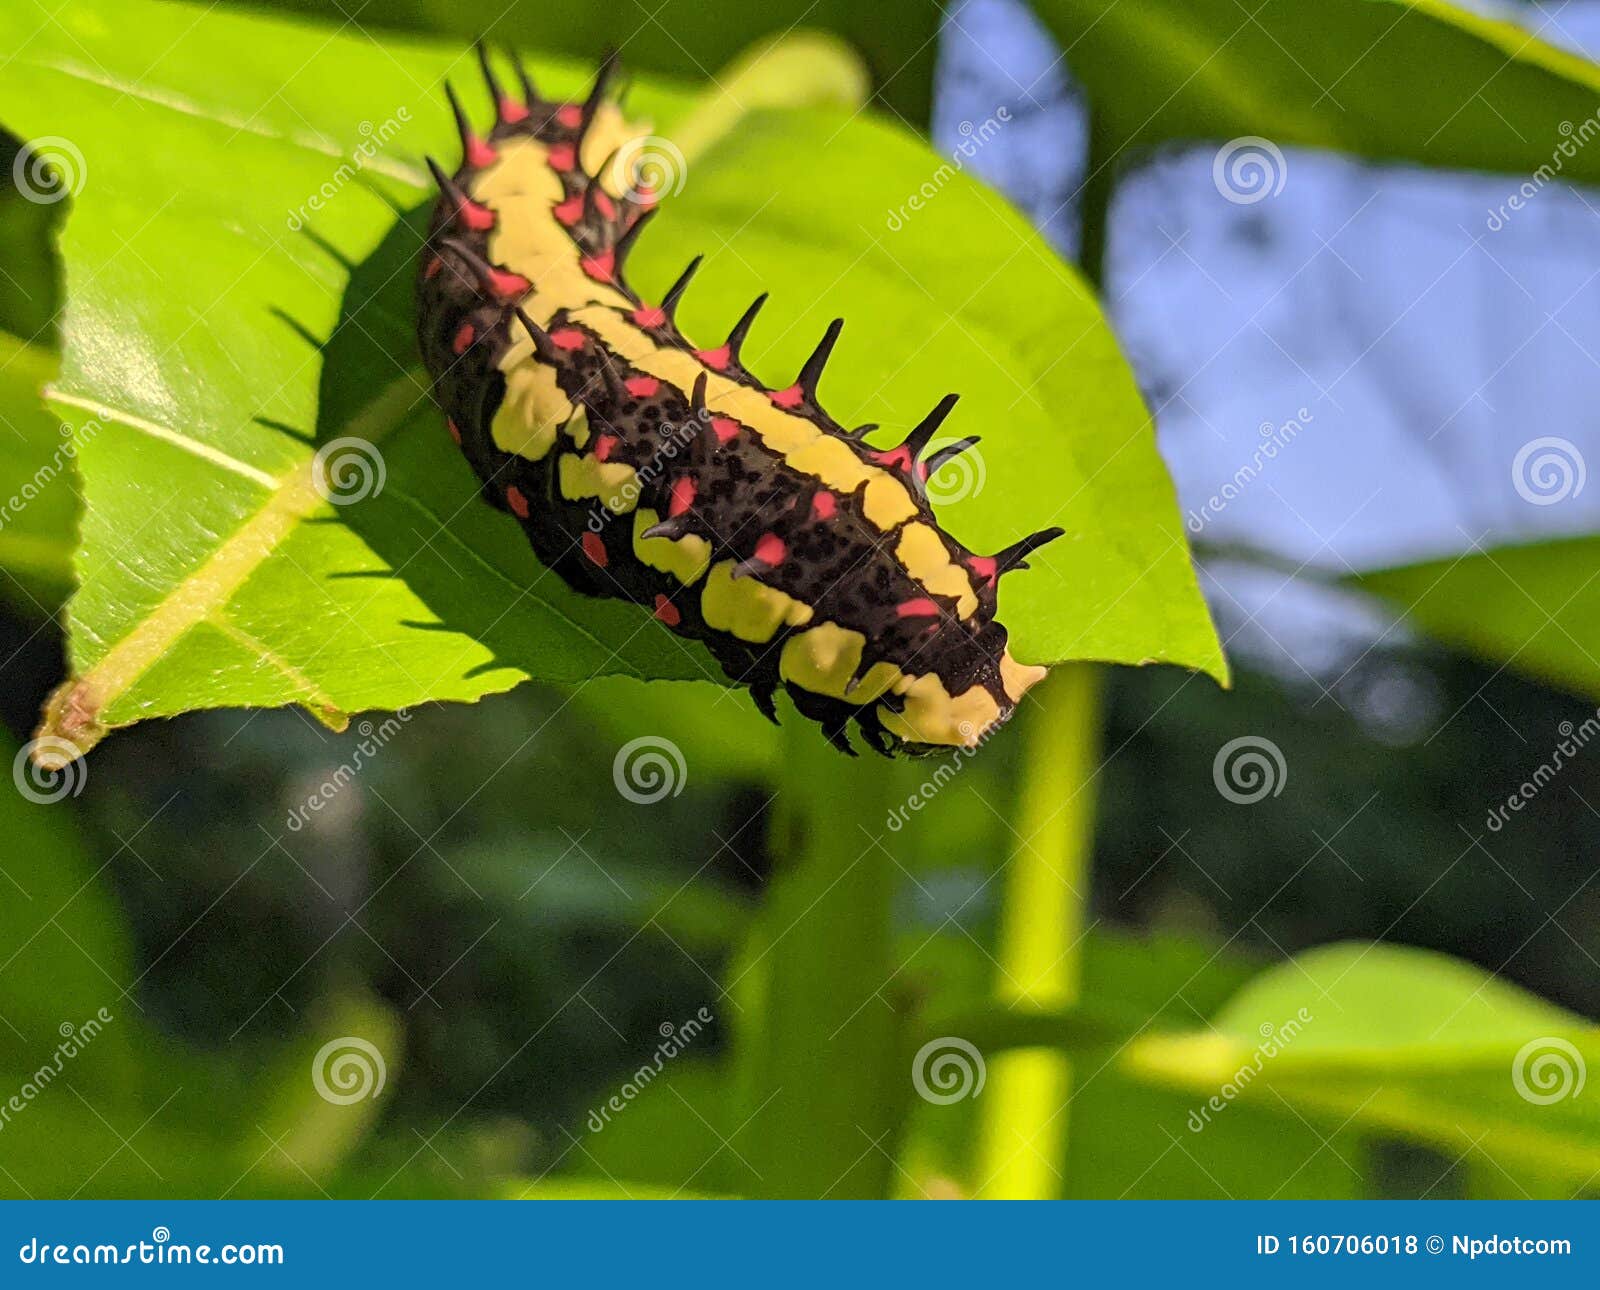 ba quiescent insect pupa  especially of a butterfly or moth in thailand